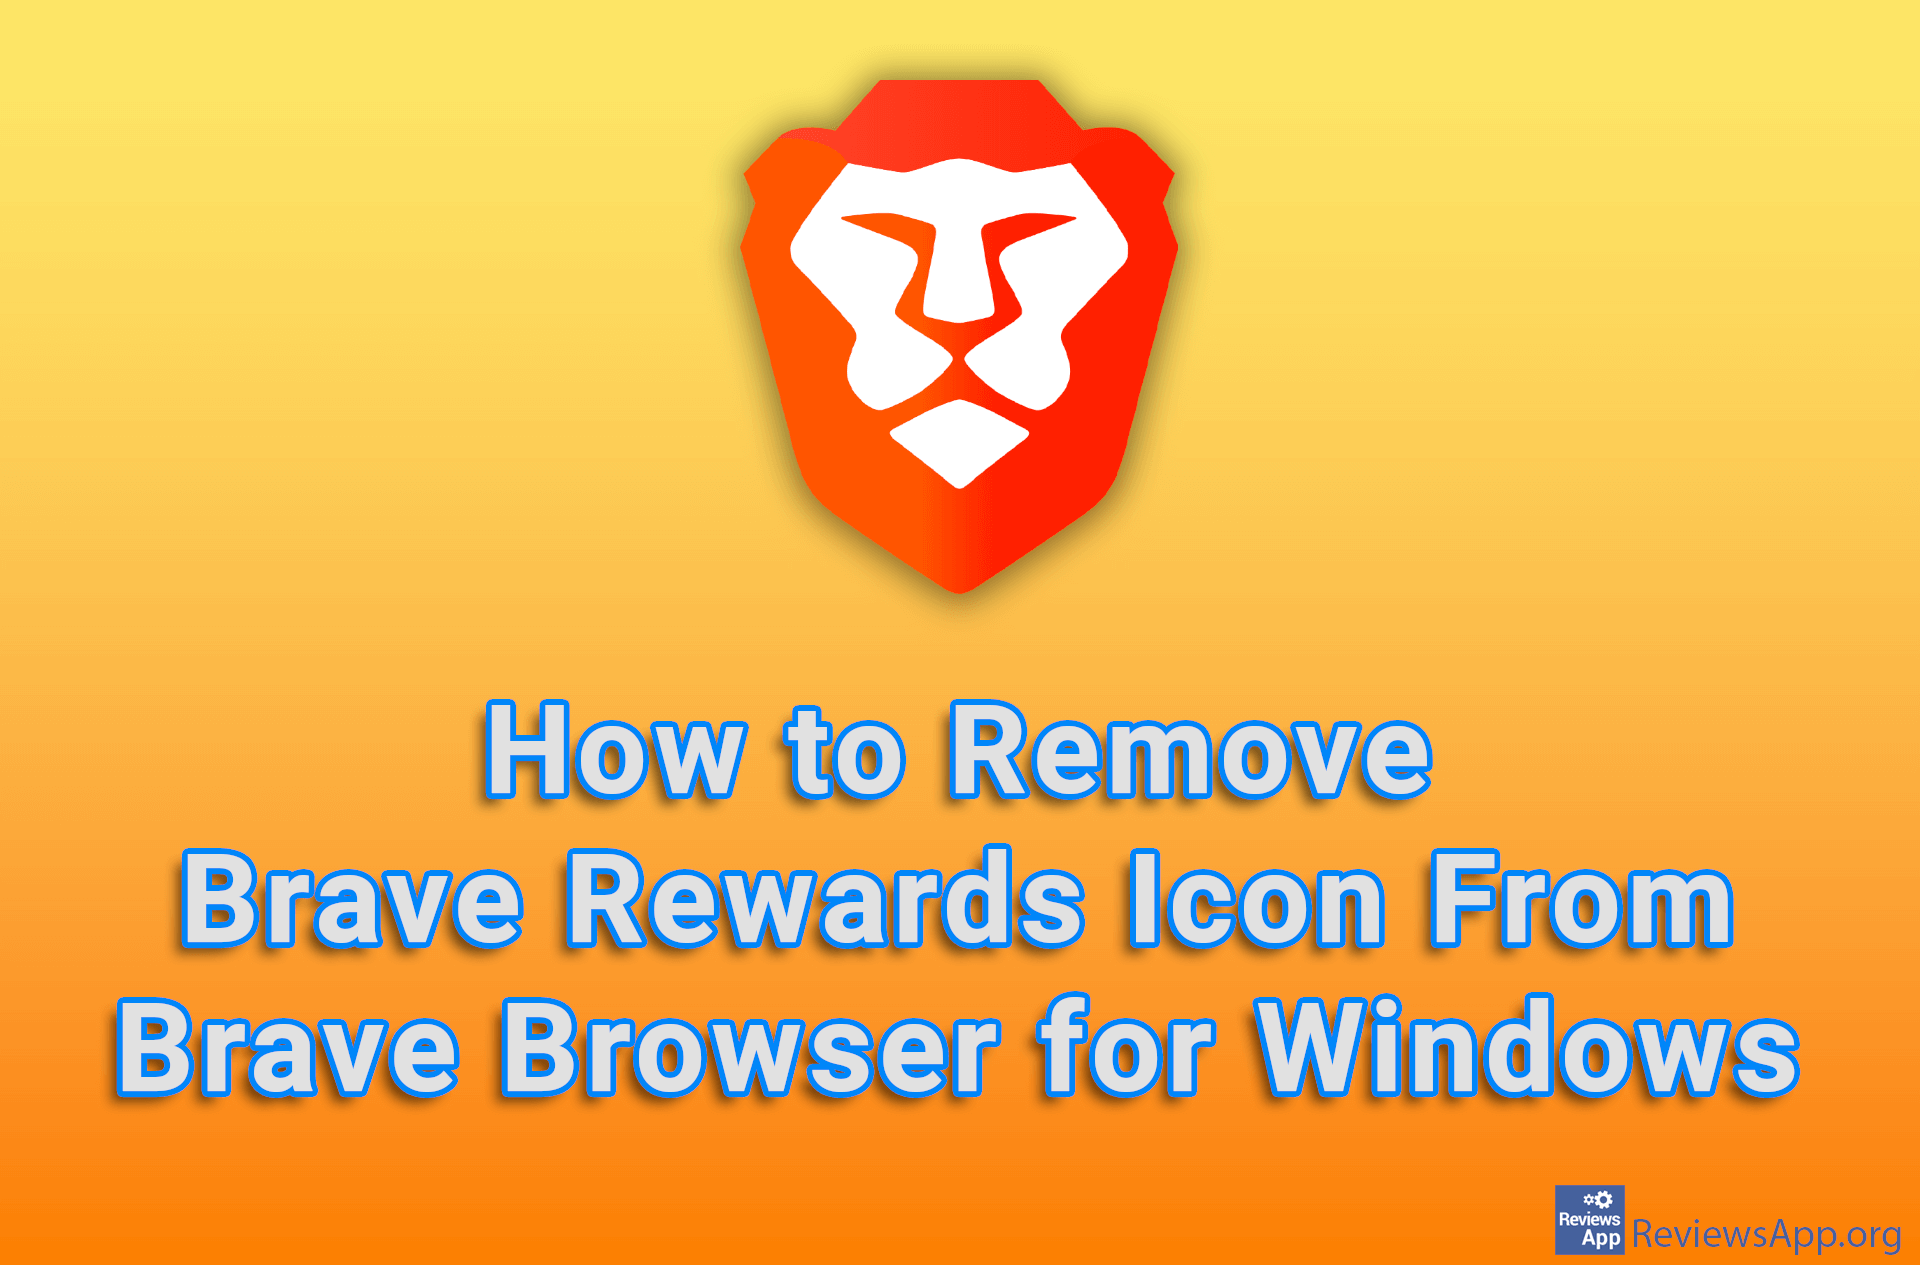 How to Remove Brave Rewards Icon From Brave Browser for Windows